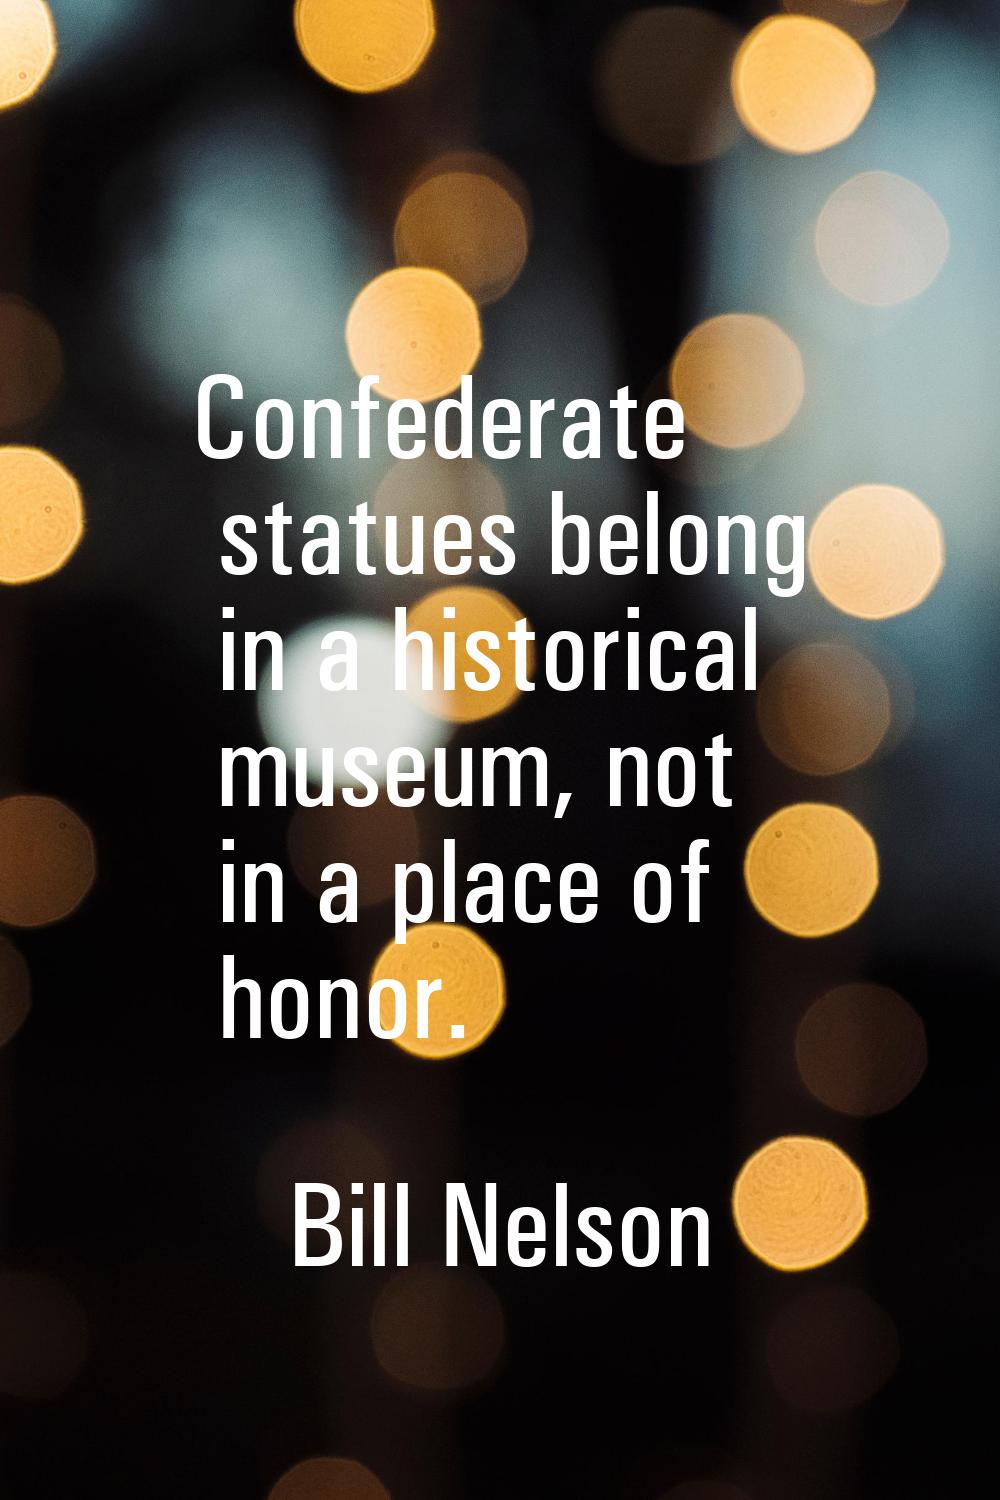 Confederate statues belong in a historical museum, not in a place of honor.